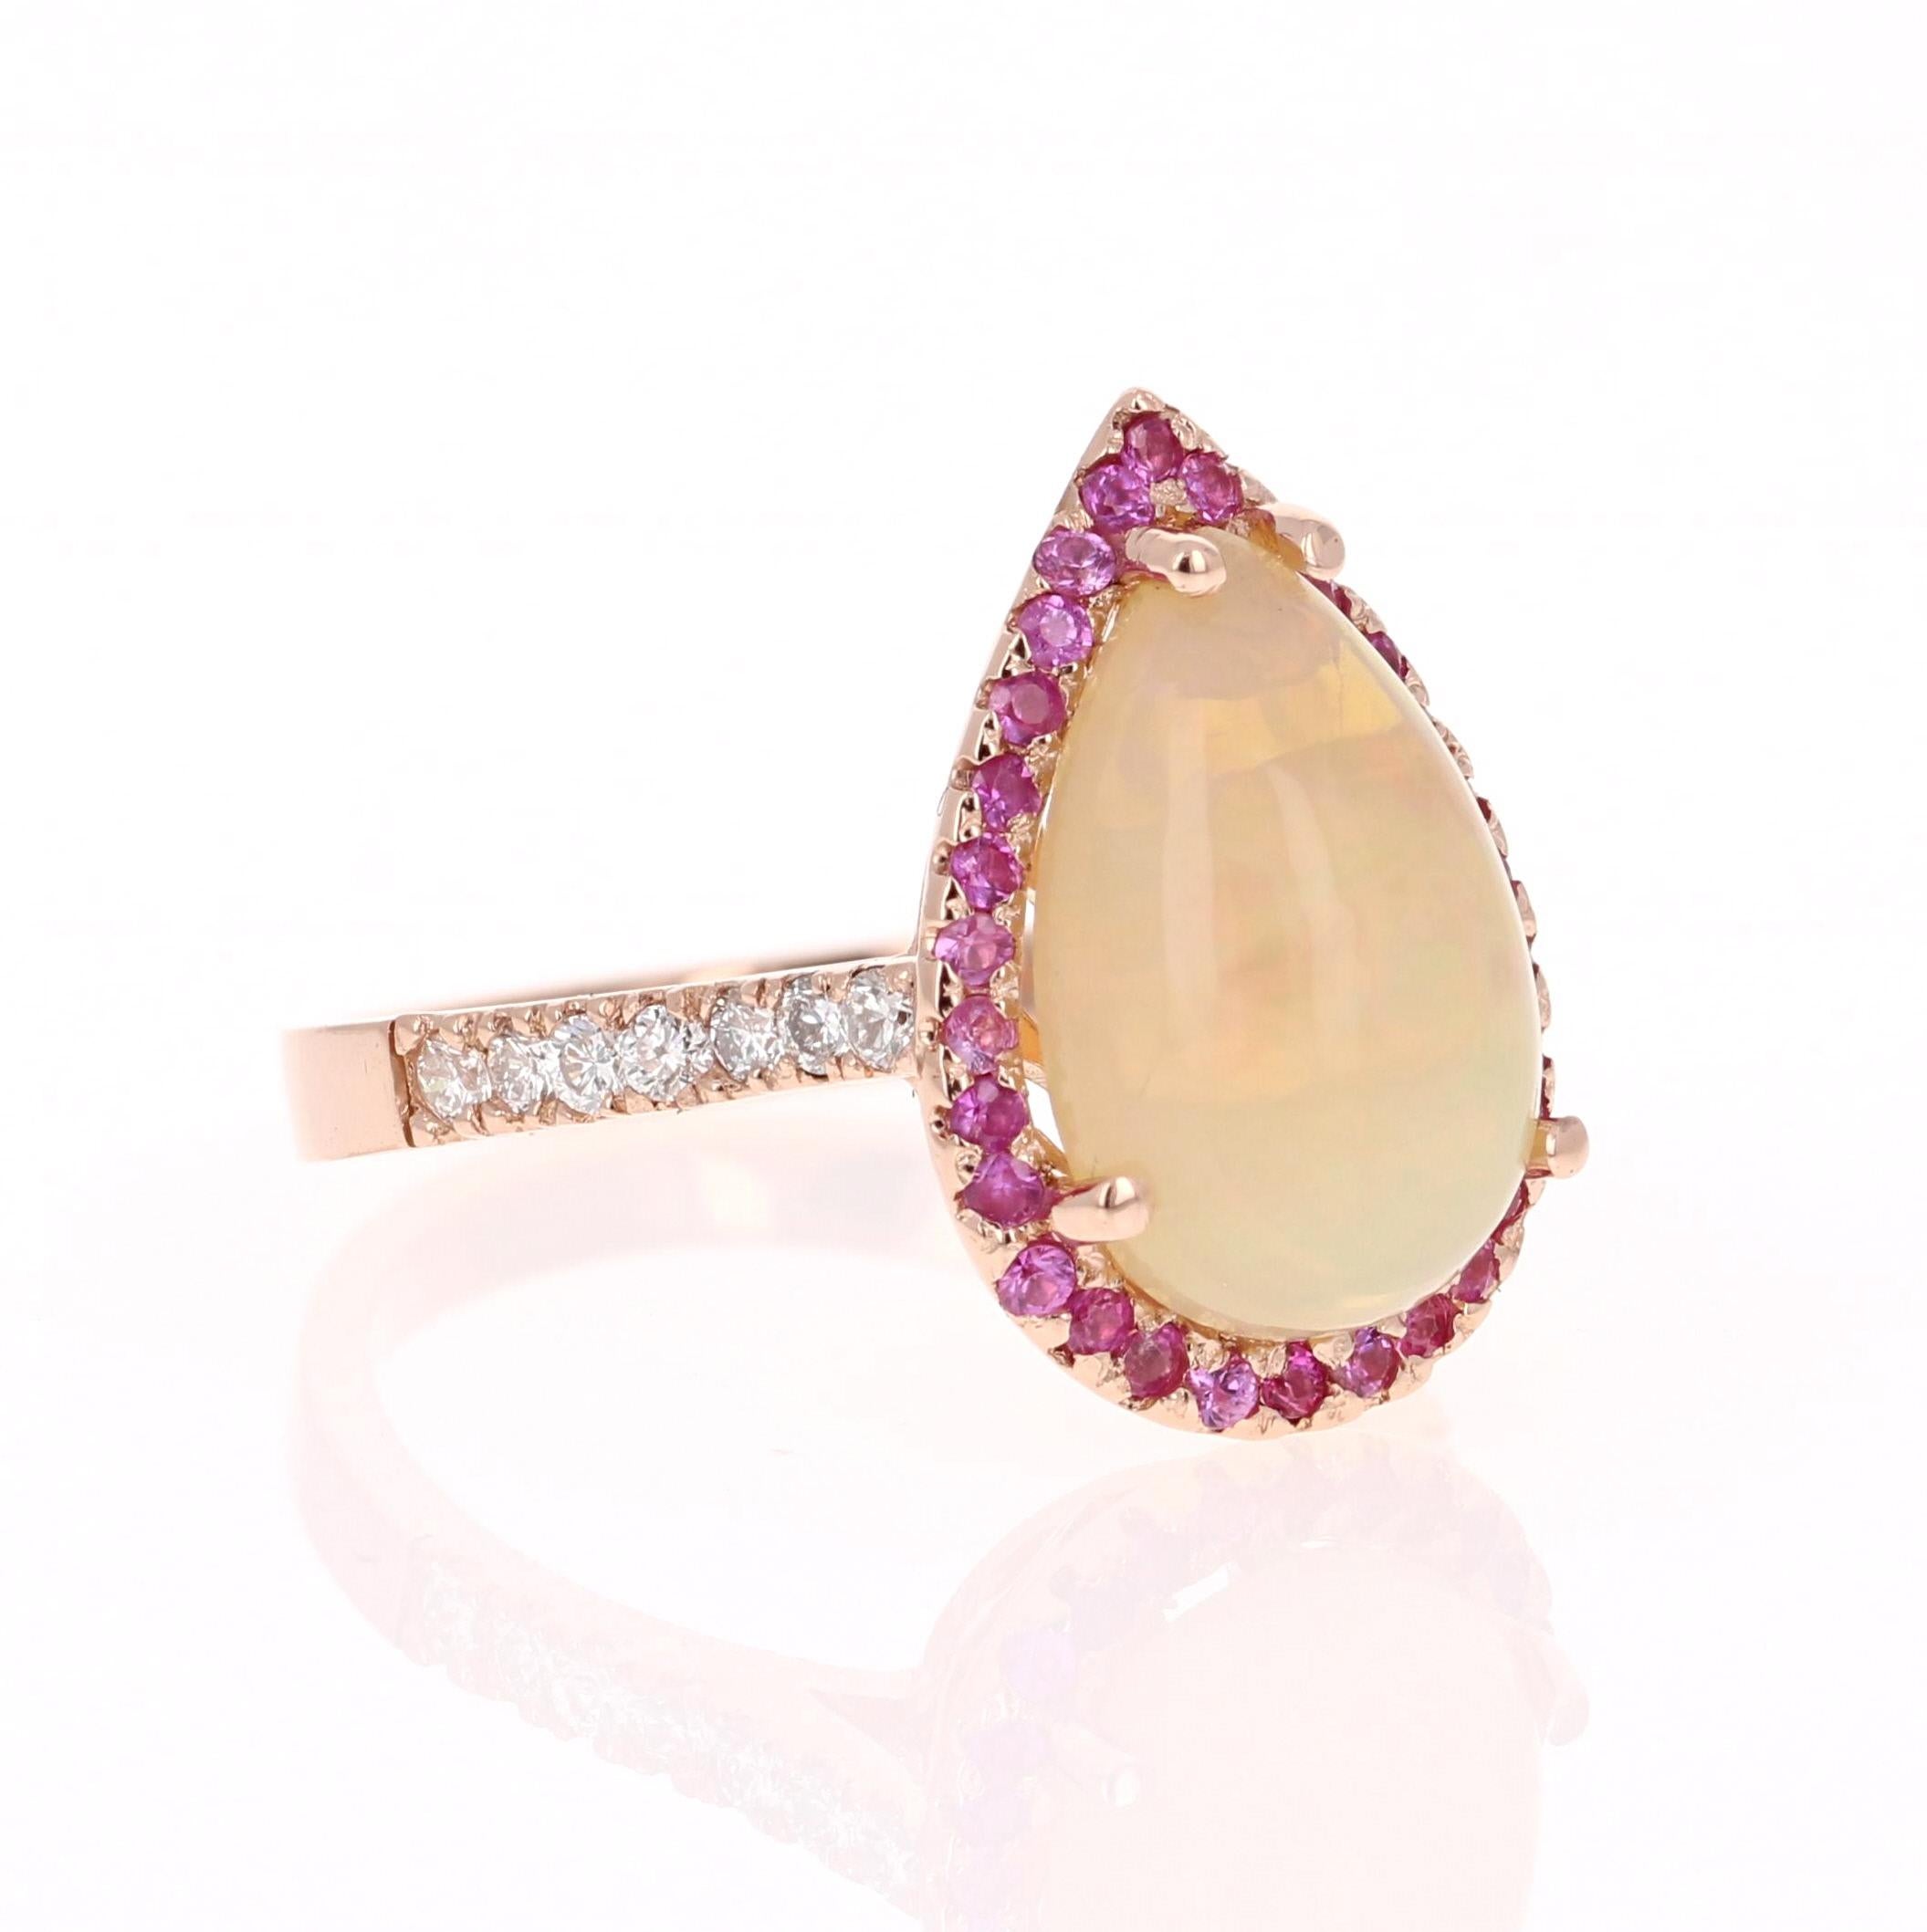 Unique and beautifully designed ring that can be a masterpiece to anyone's jewelry collection!   

This ring has a magnificently large 3.04 Carat Natural Pear Cut Opal and is surrounded by 32 Natural Pink Sapphires that weigh 0.40 Carats and is